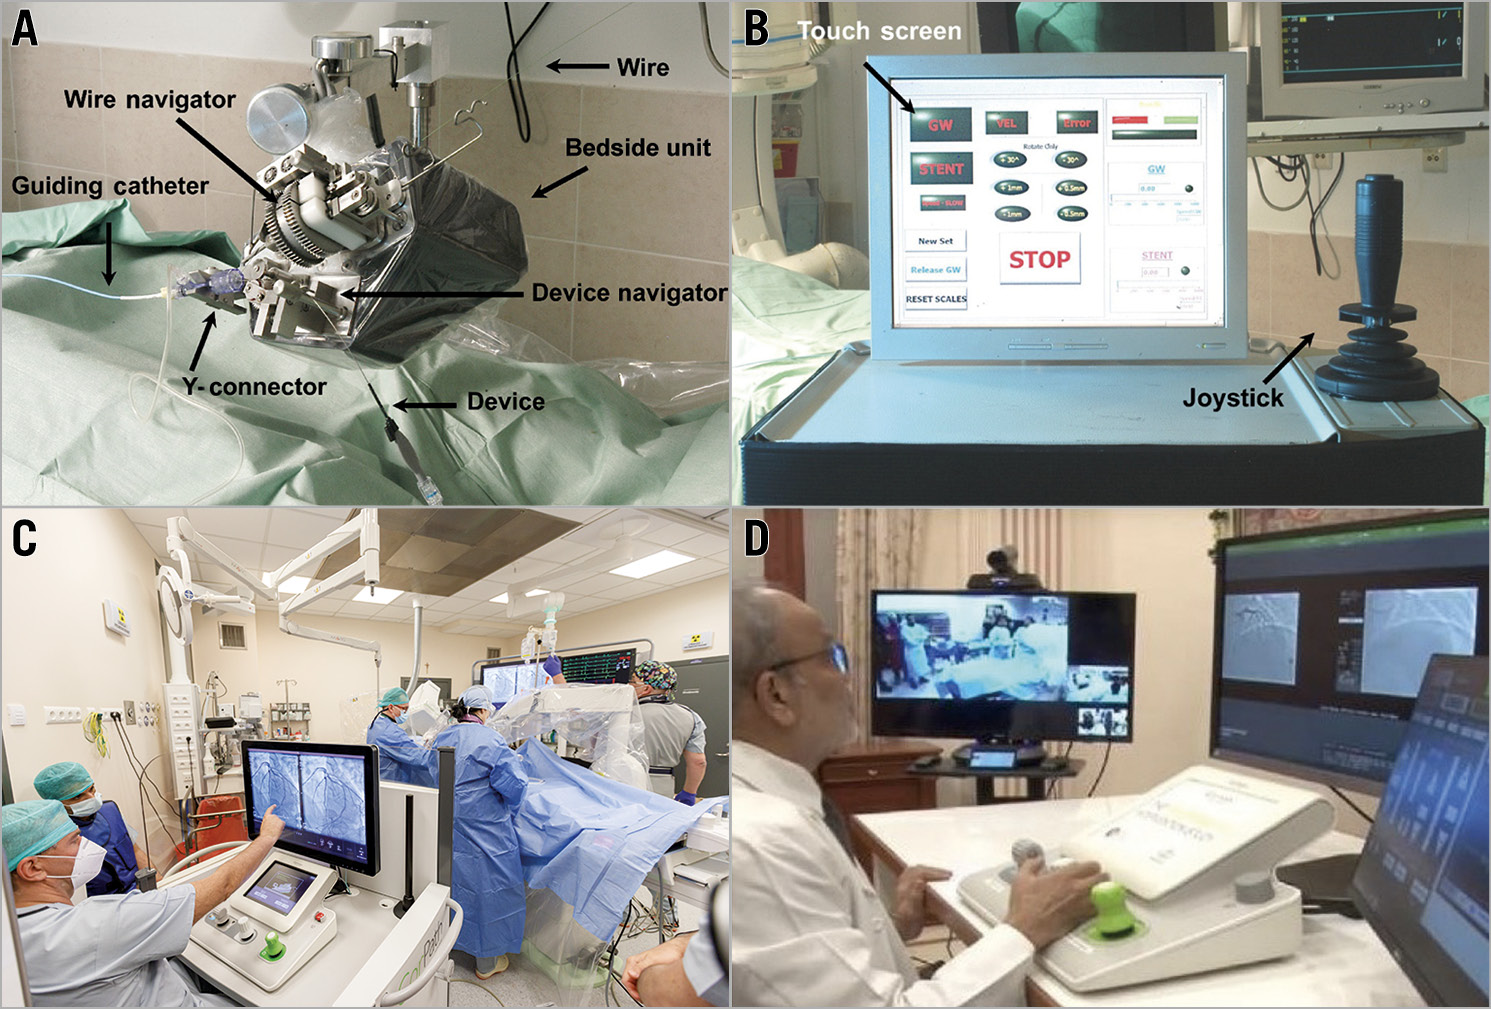 Figure 3. The evolution of the robotic PCI system and concept. A) The original Remote Navigation System manipulating wire and device are controlled at the console by a joystick (B). Reprinted from Beyar et al55, with permission from Elsevier. C) The current CorPath GRX control station60 is positioned within a shielded cockpit in the catheterisation laboratory with the operator console controlling the wire, the device, and the guide catheter (taken during robotic PCI at the Interventional Cardiology Center, Jagiellonian University Hospital, Poland). D) Set-up for the first remote catheterisation performed by Dr Tejas Patel in Ahmadabad, India. The control station is located 35 km away from the catheterisation laboratory, with the robotic arm at the patient side. The video of the patient room and the monitor screen are transmitted via the internet. From Patel et al79 [CC BY-NC-ND 4.0].